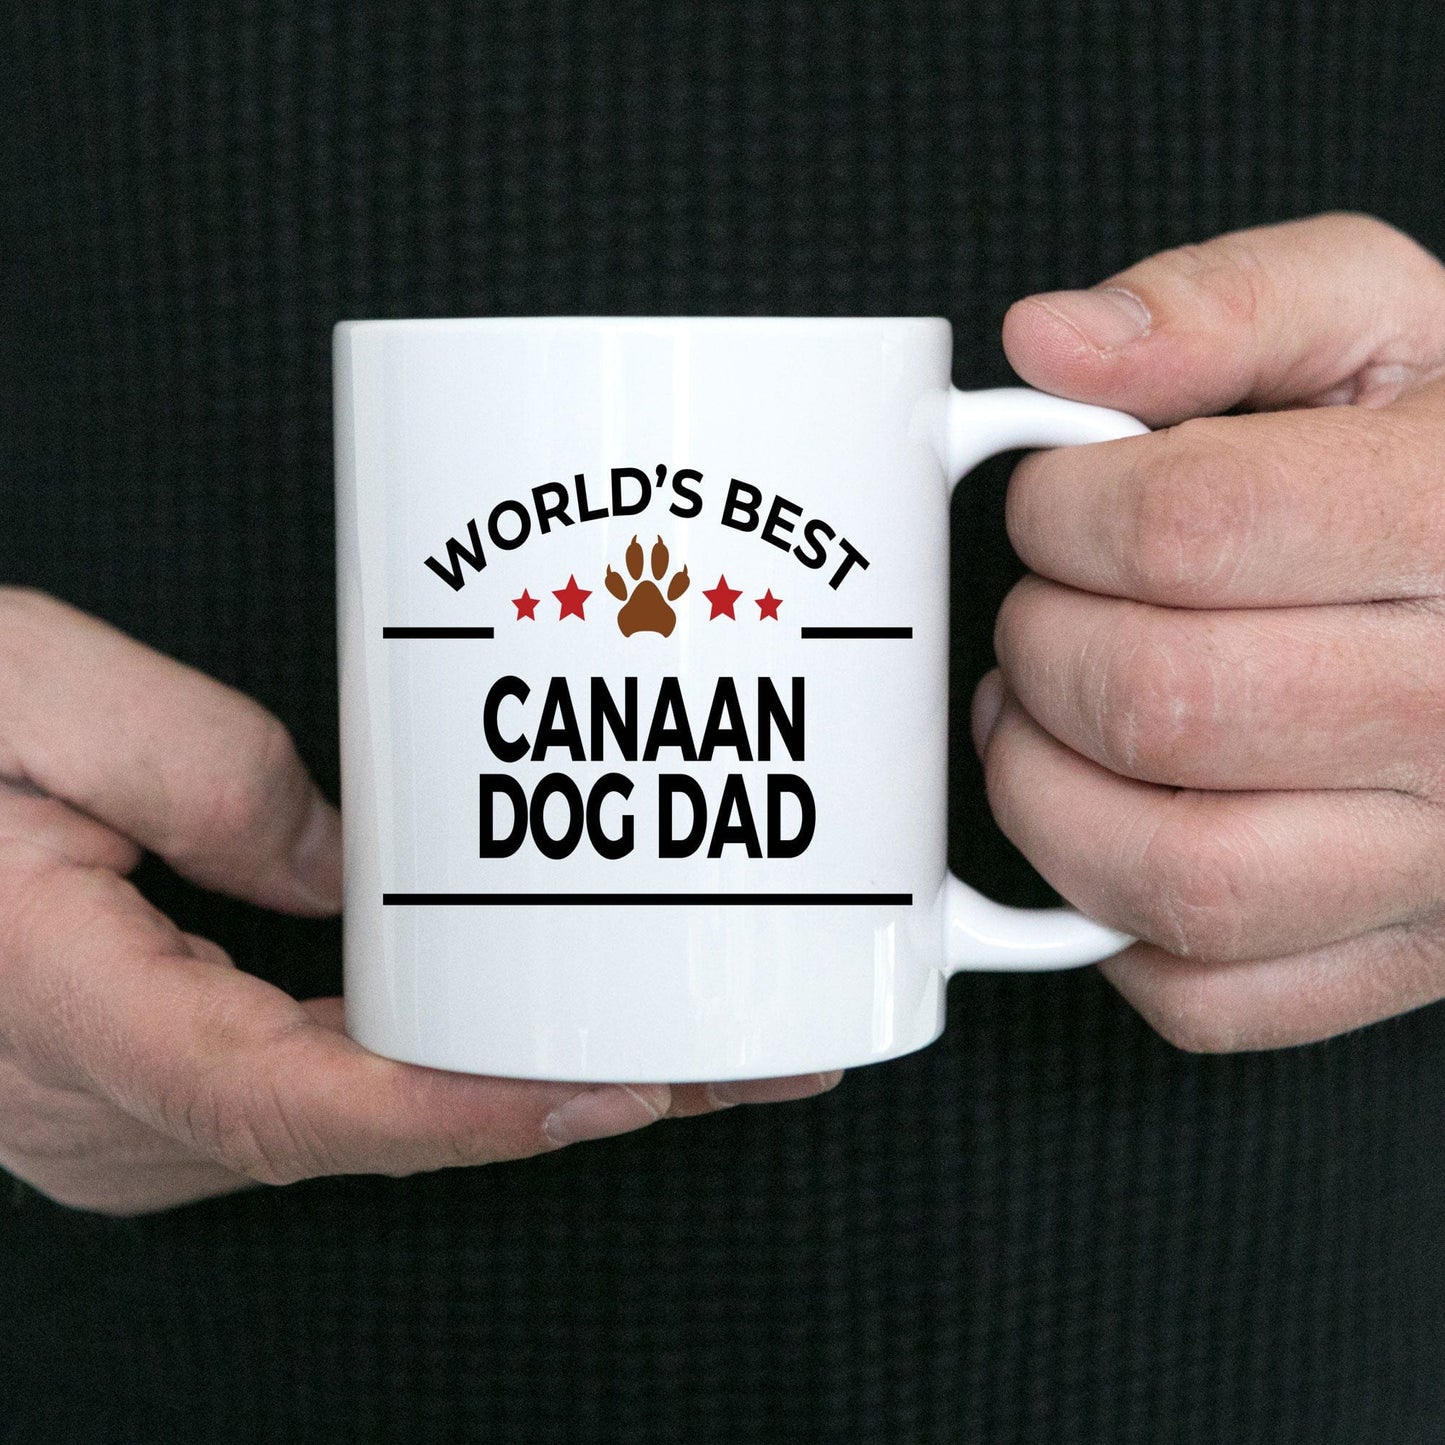 Canaan Dog Lover Gift World's Best Dad Birthday Father's Day White Ceramic Coffee Mug